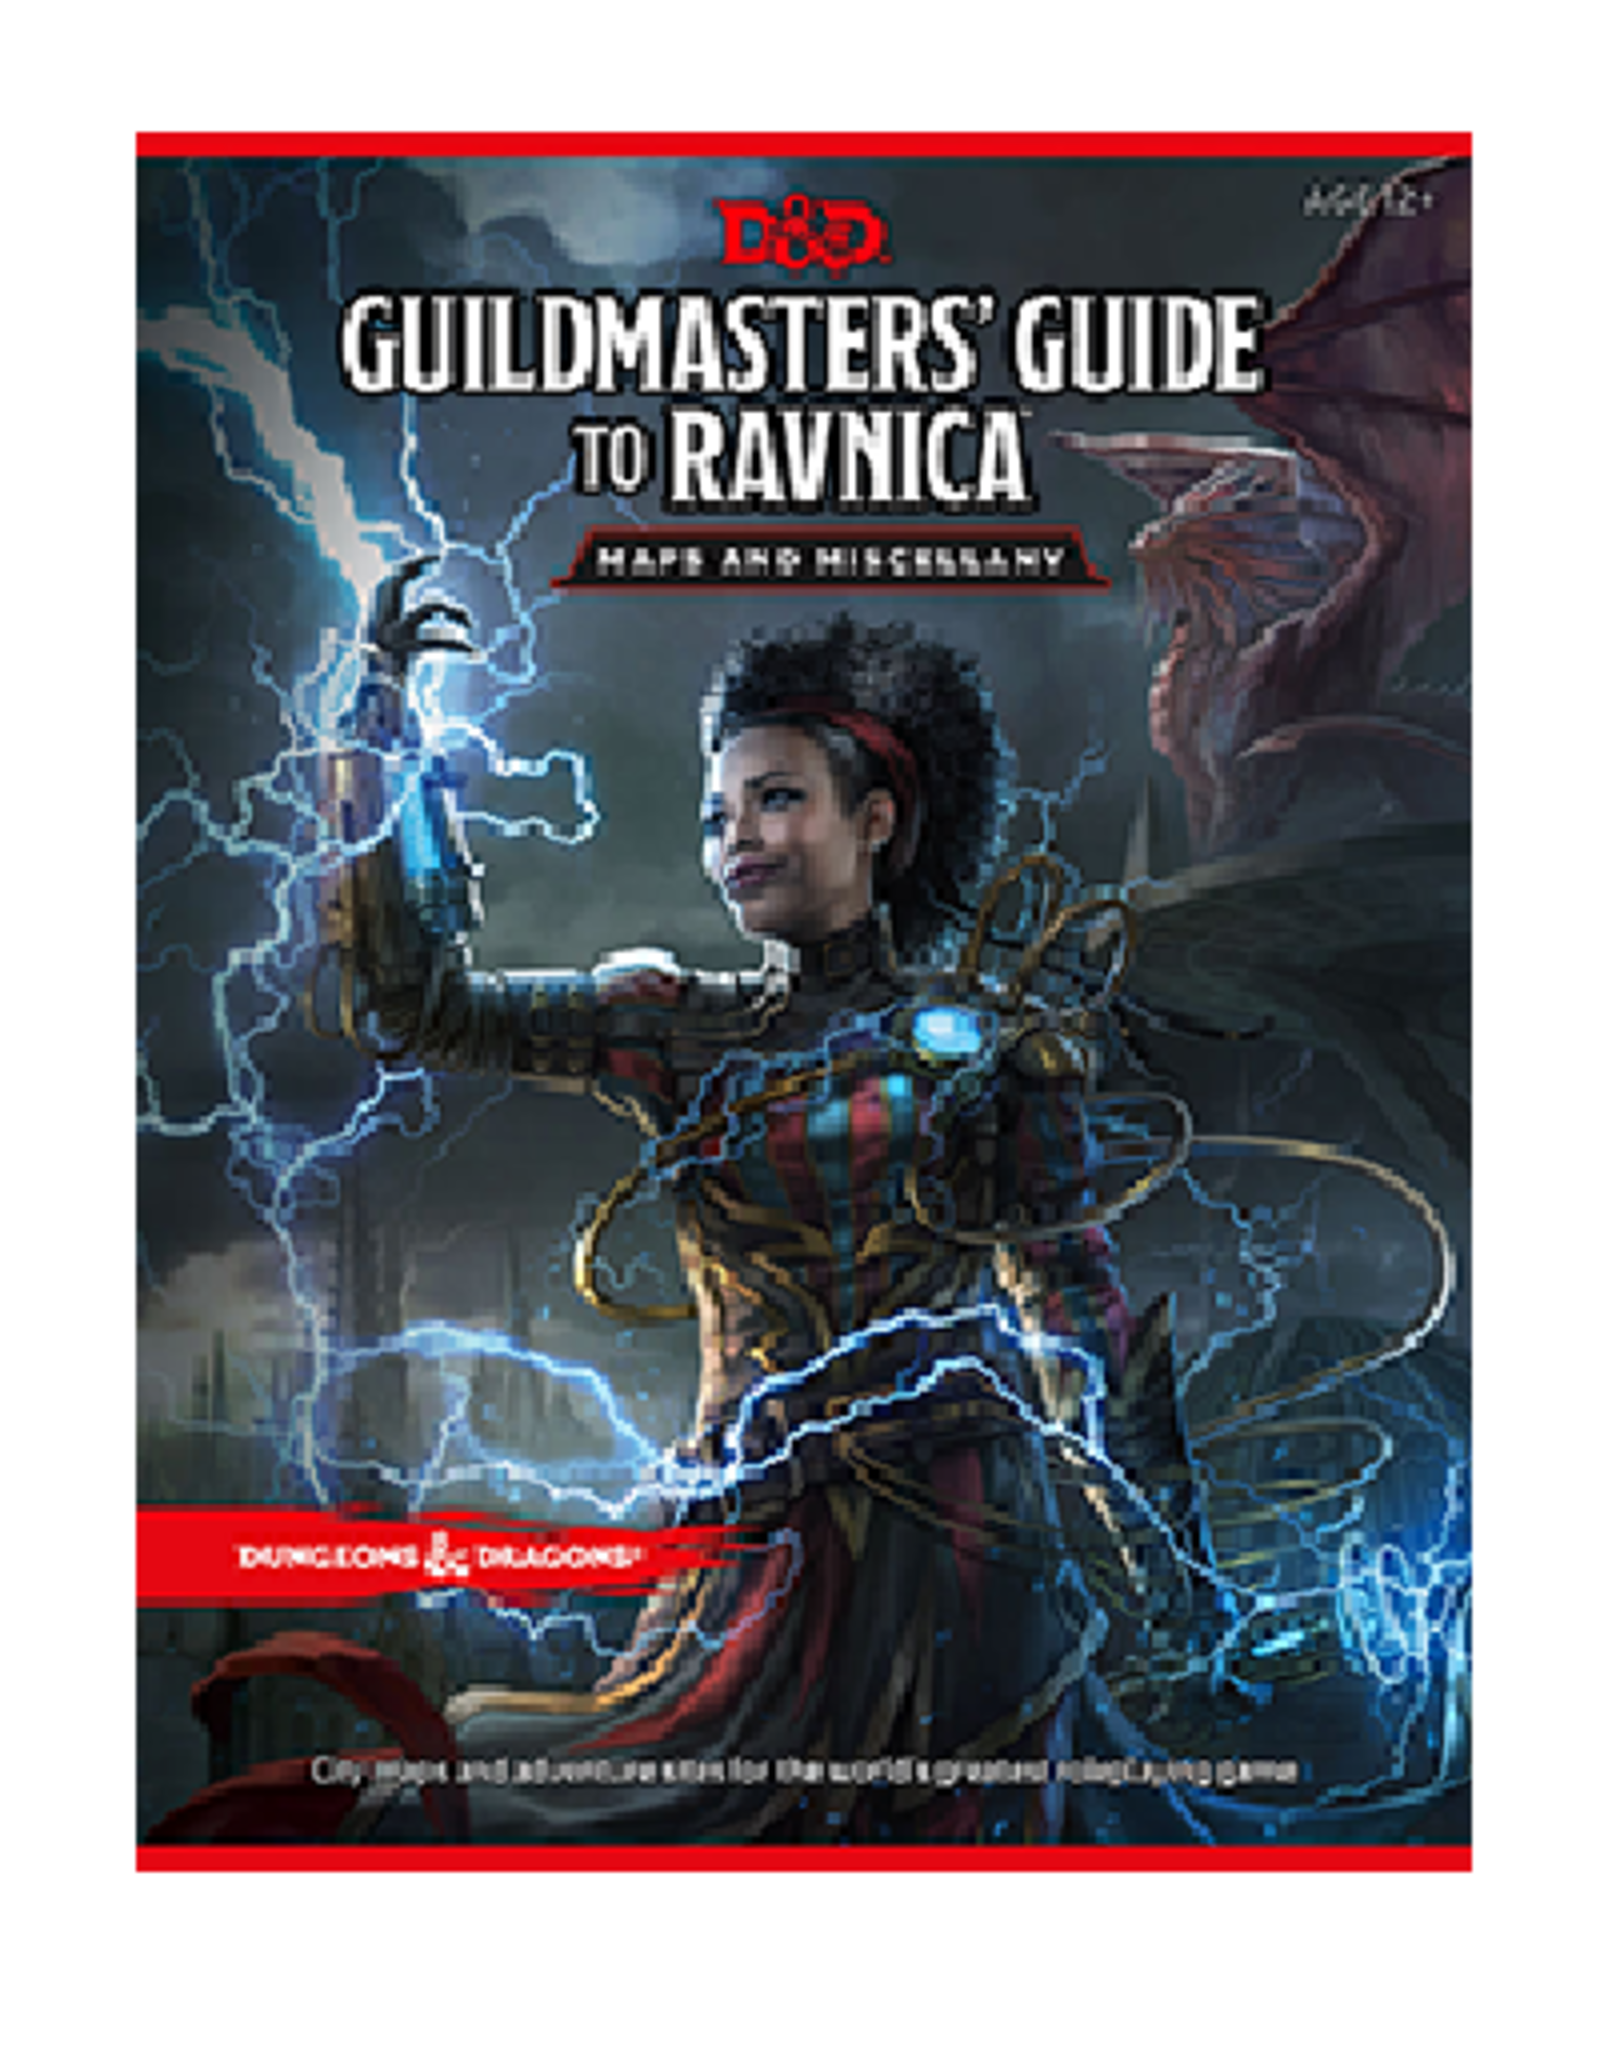 Wizards of the Coast Guildmaster's Guide to Ravnica (Maps and Miscellany)